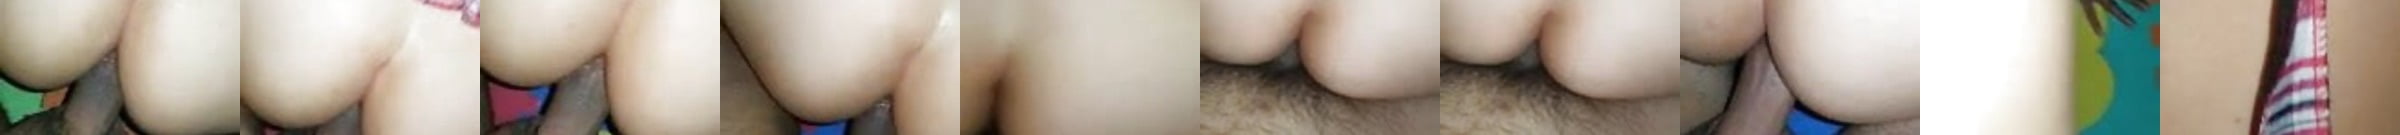 Featured Glory Hole Porn Videos 202 Xhamster